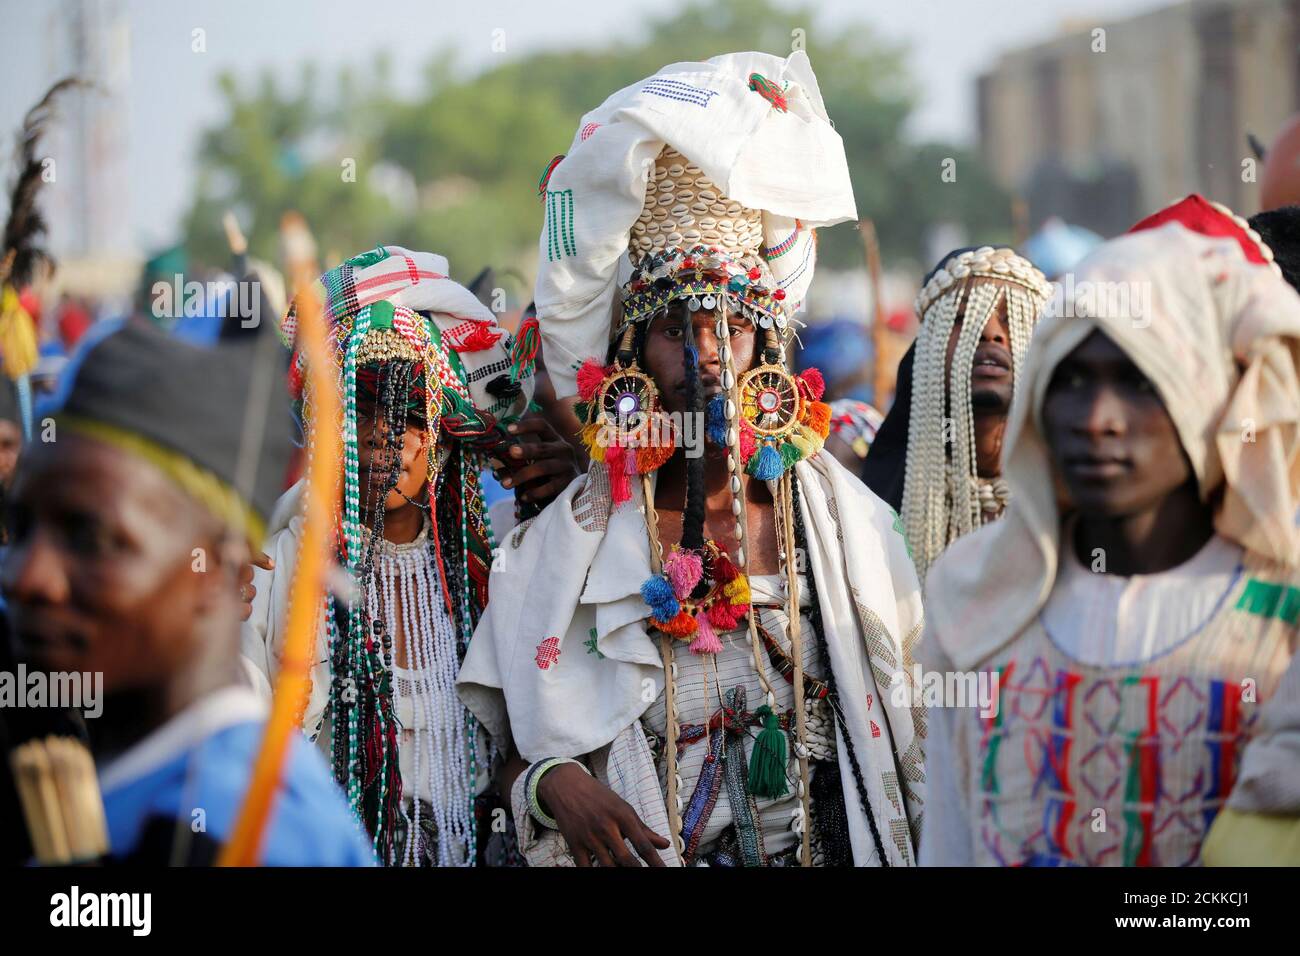 Traditionalists wearing local regalia attend the durbar festival on the second day of Eid-al-Fitr celebrations in Nigeria's northern city of Kano, July 7, 2016. REUTERS/Akintunde Akinleye Stock Photo